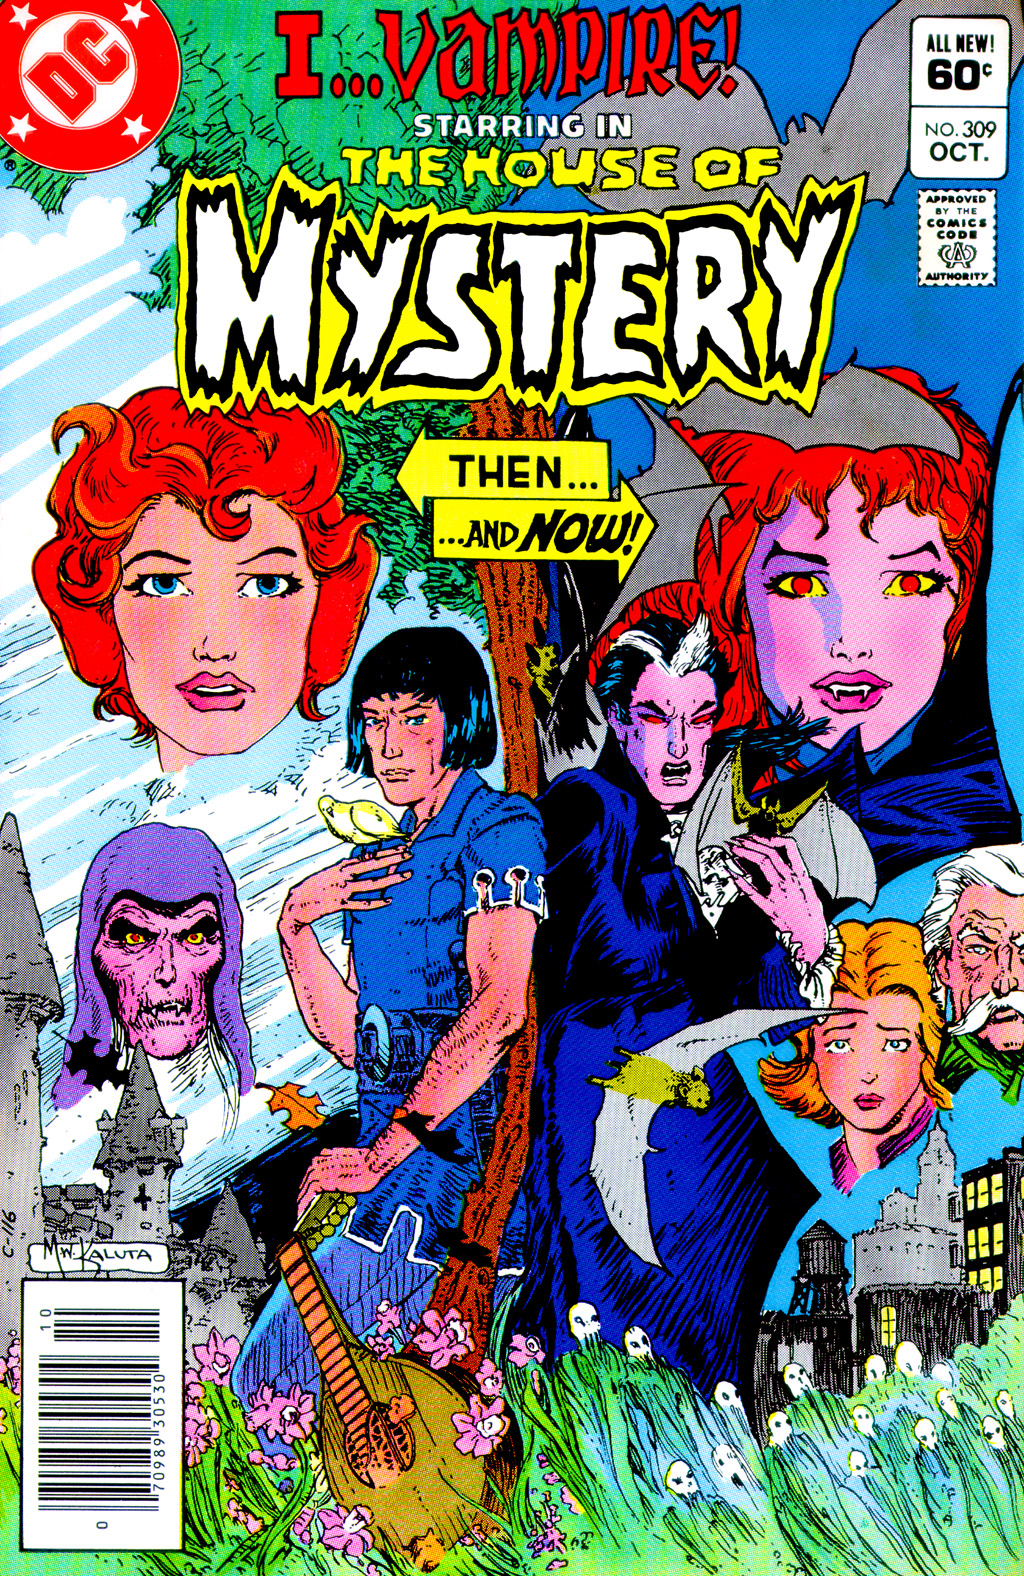 Read online House of Mystery (1951) comic -  Issue #309 - 1